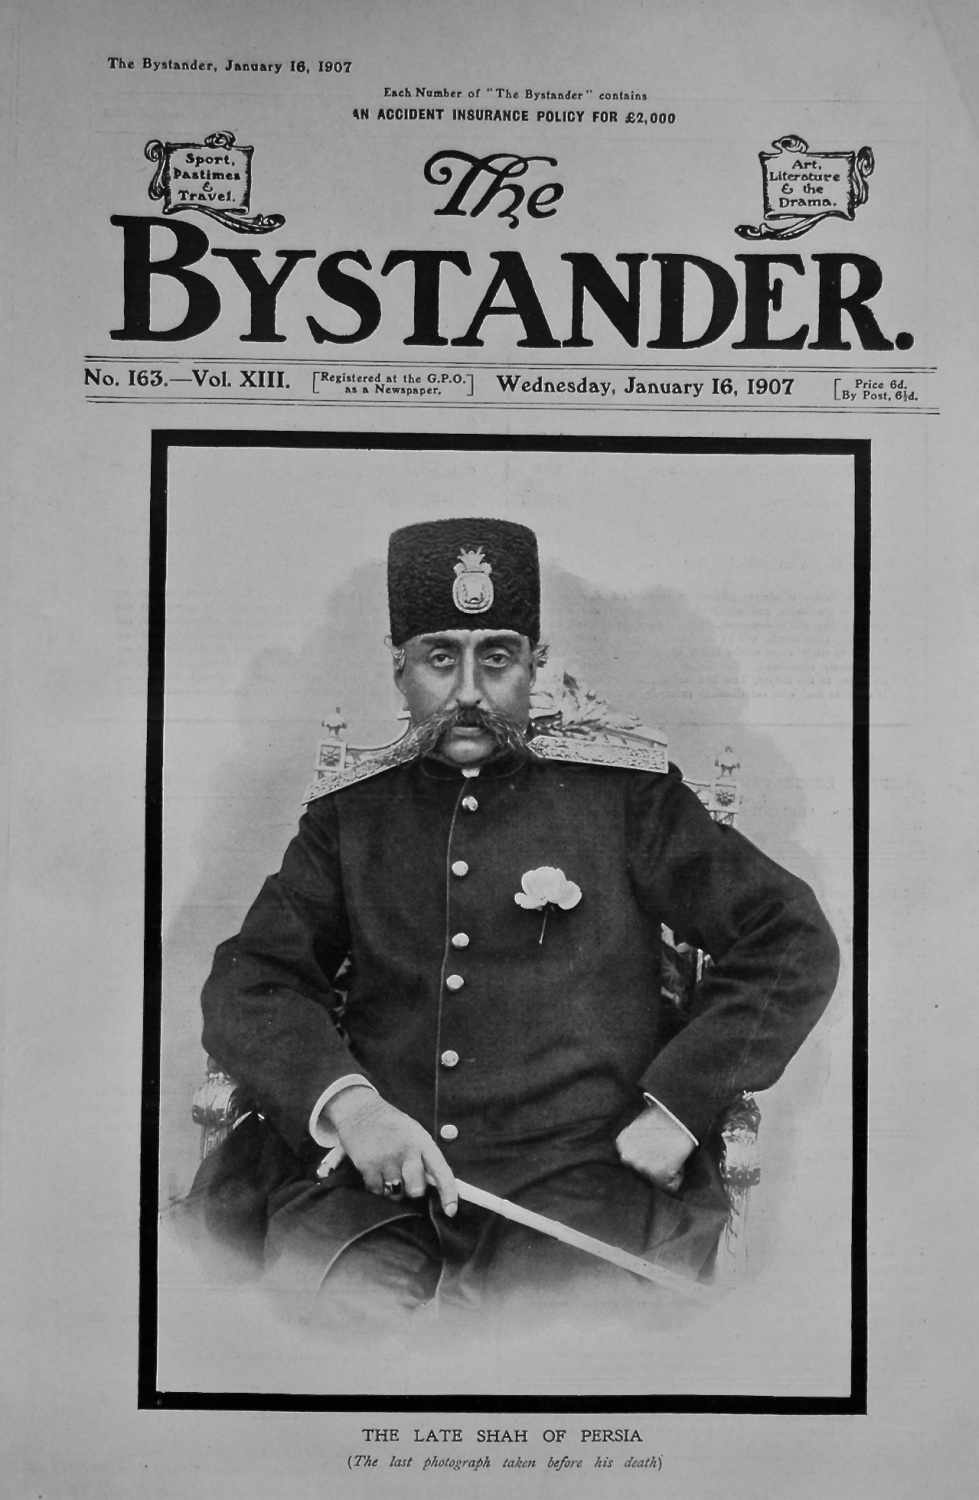 The Bystander. January 16th, 1907.